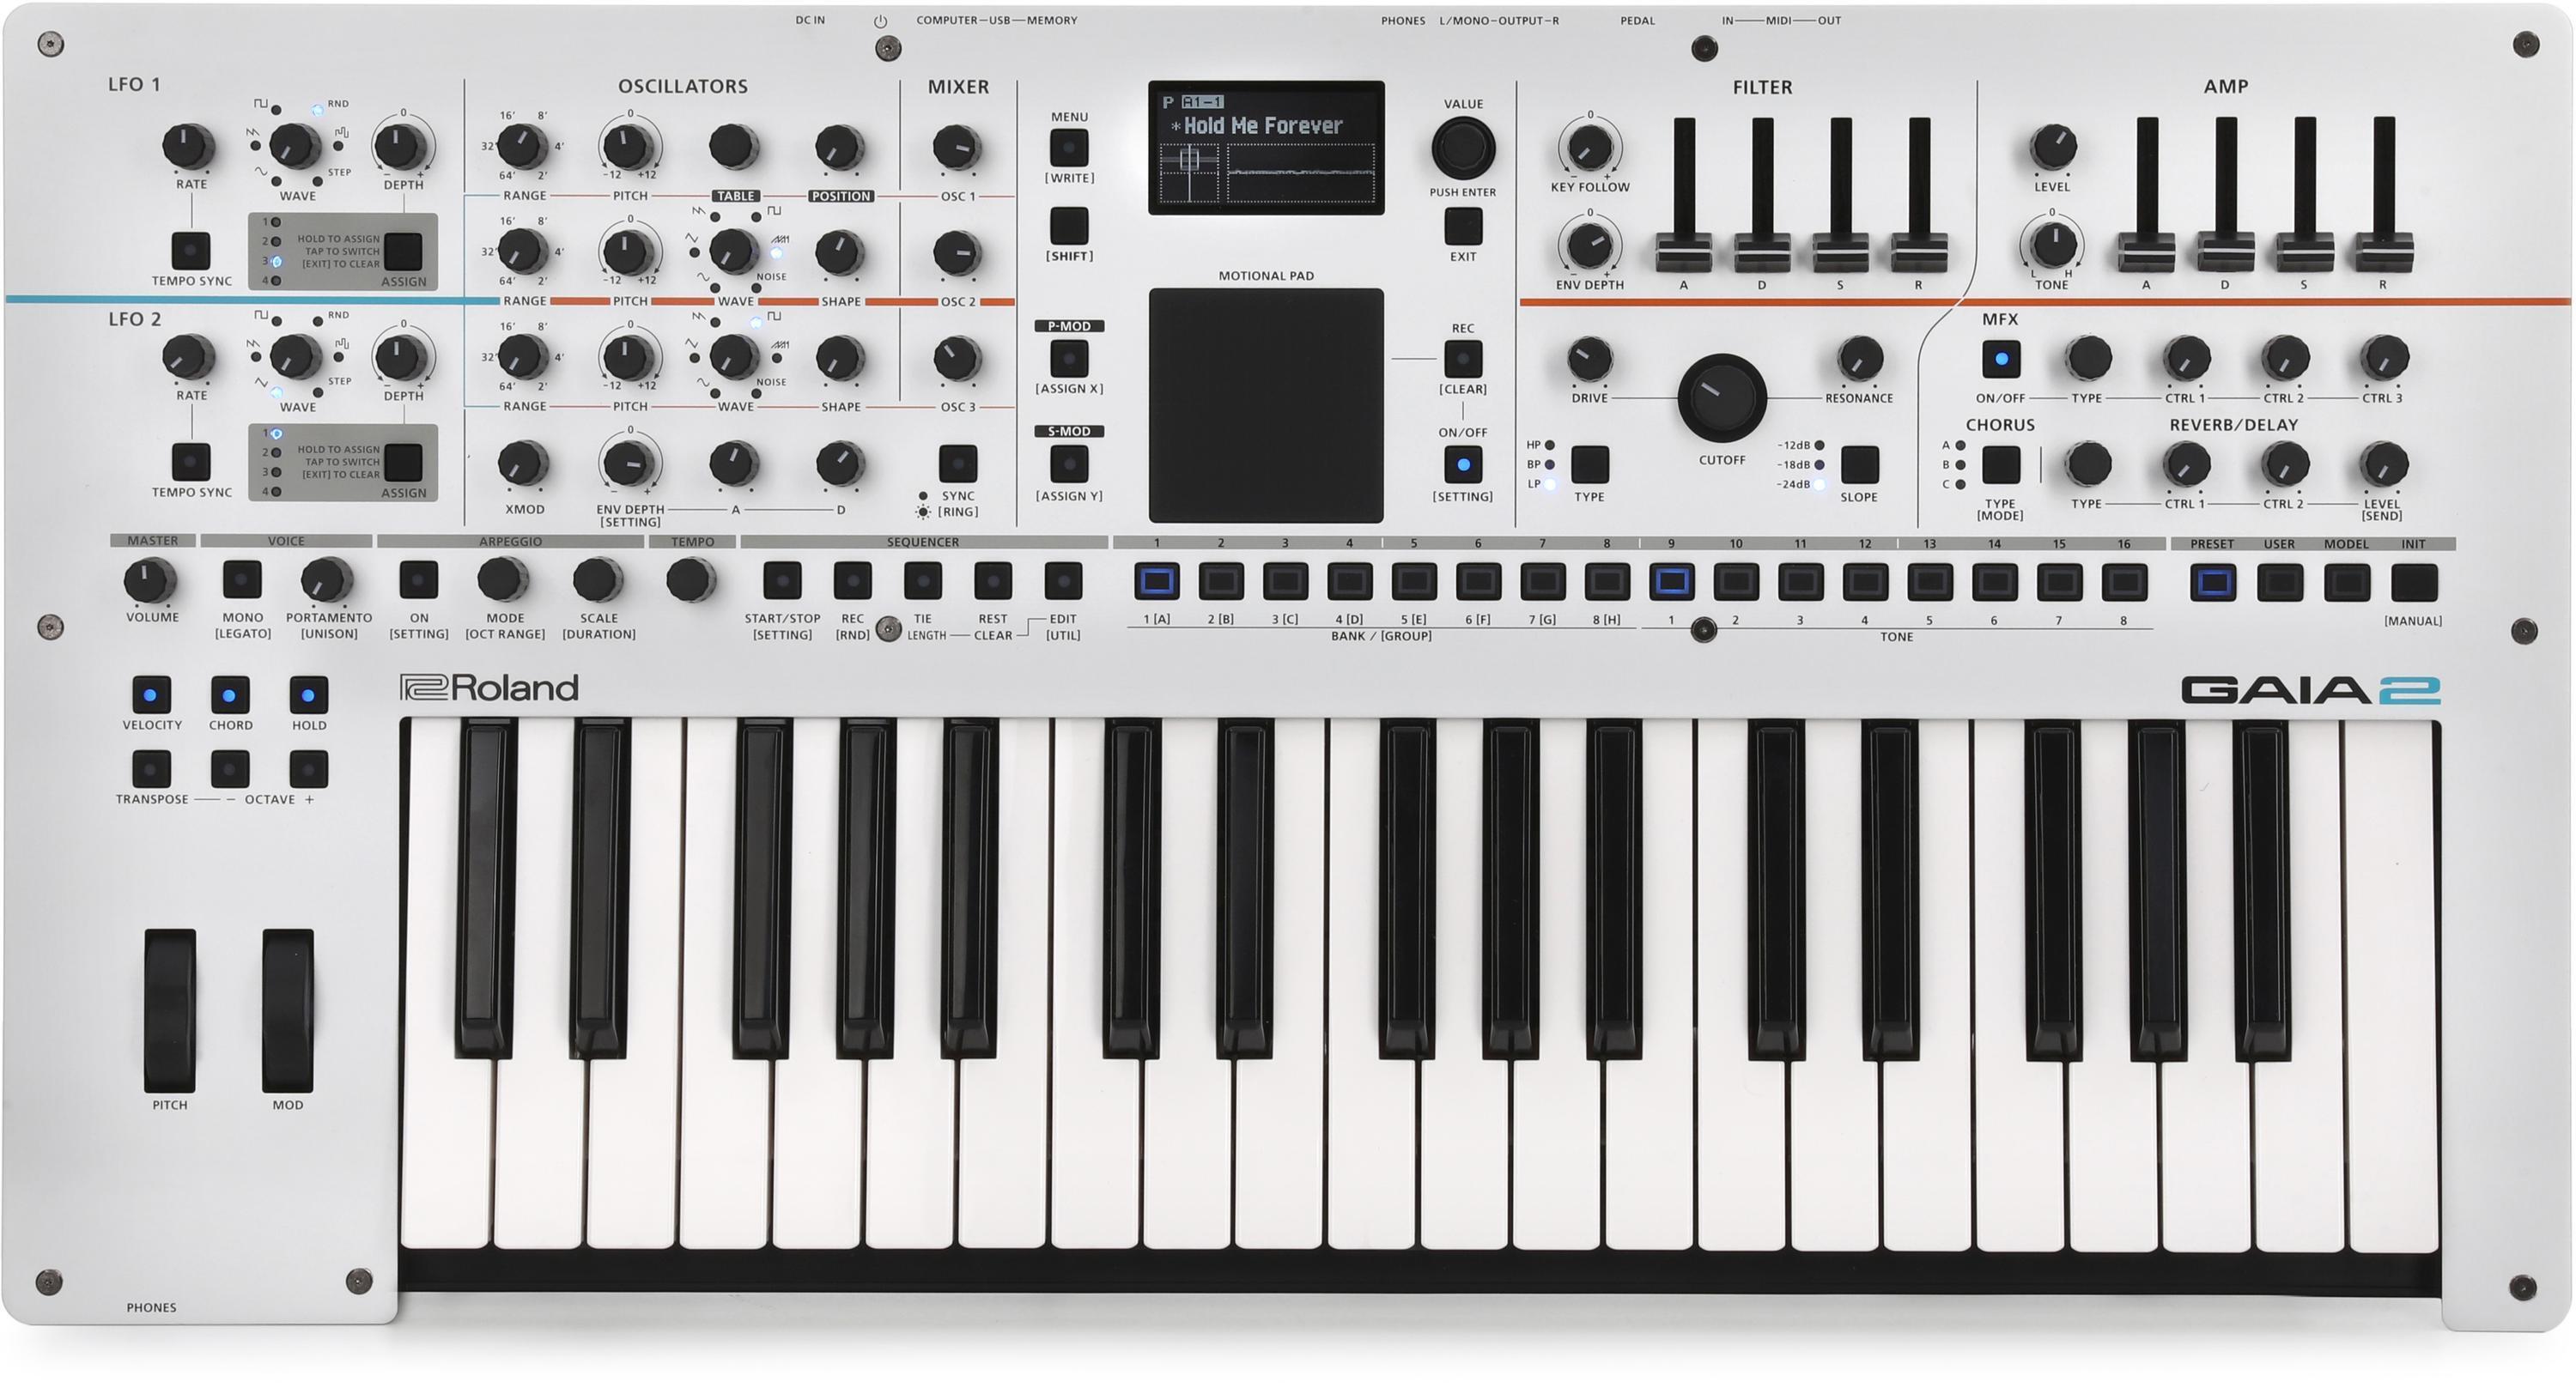 Roland JUNO-Di 61-Key Synthesizer - White | Sweetwater